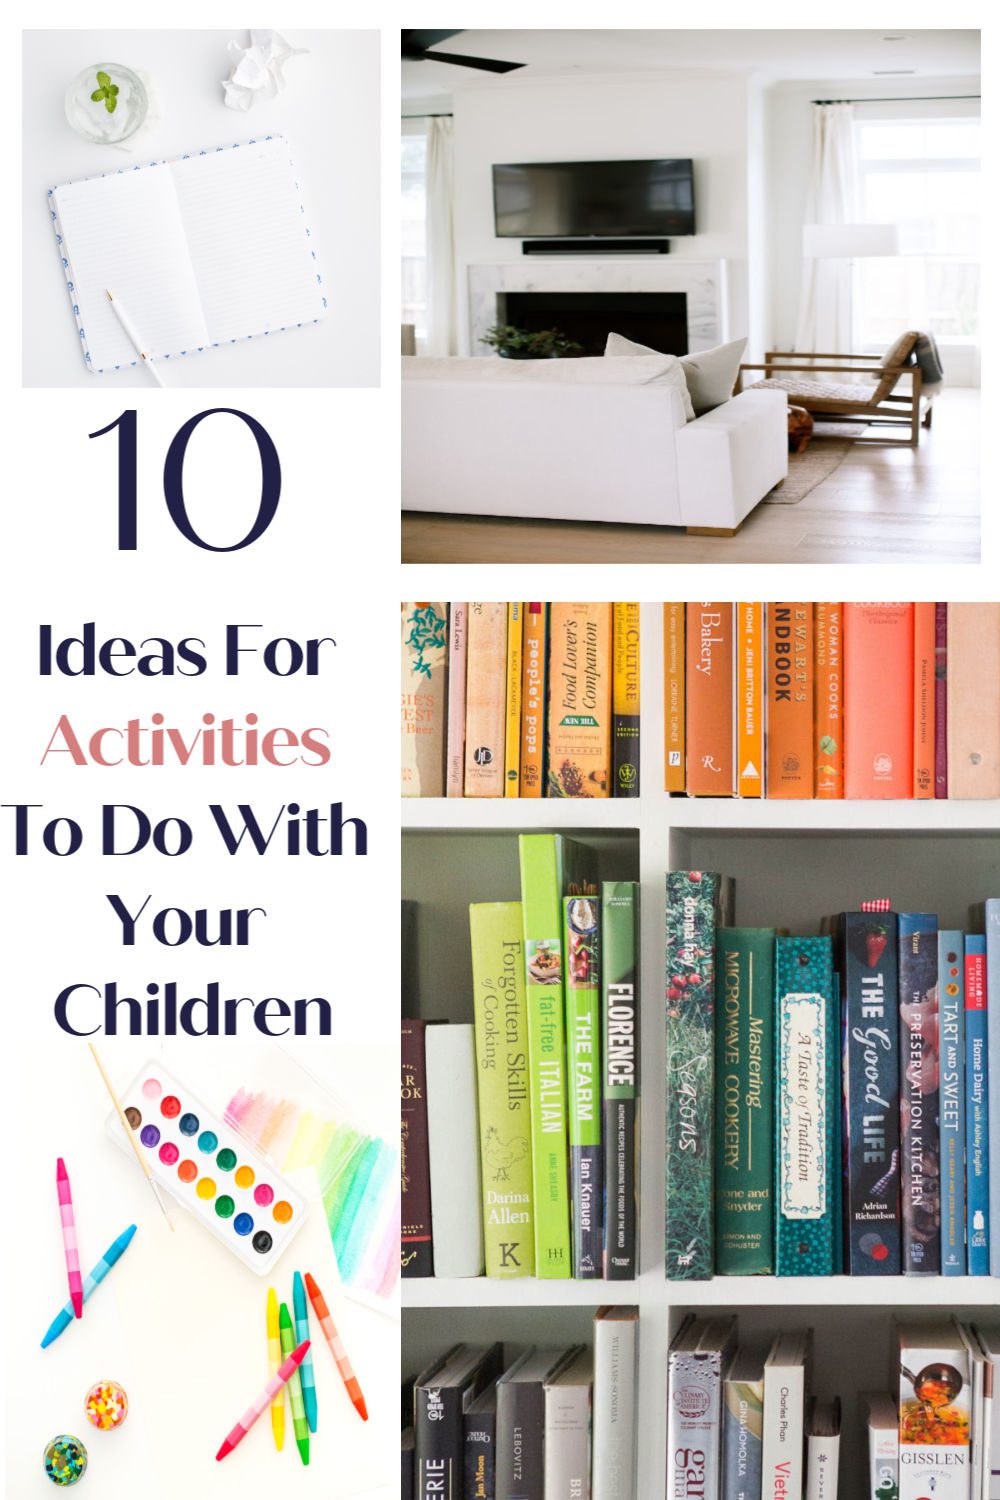 10 Ideas for activities to do with your children while at home.